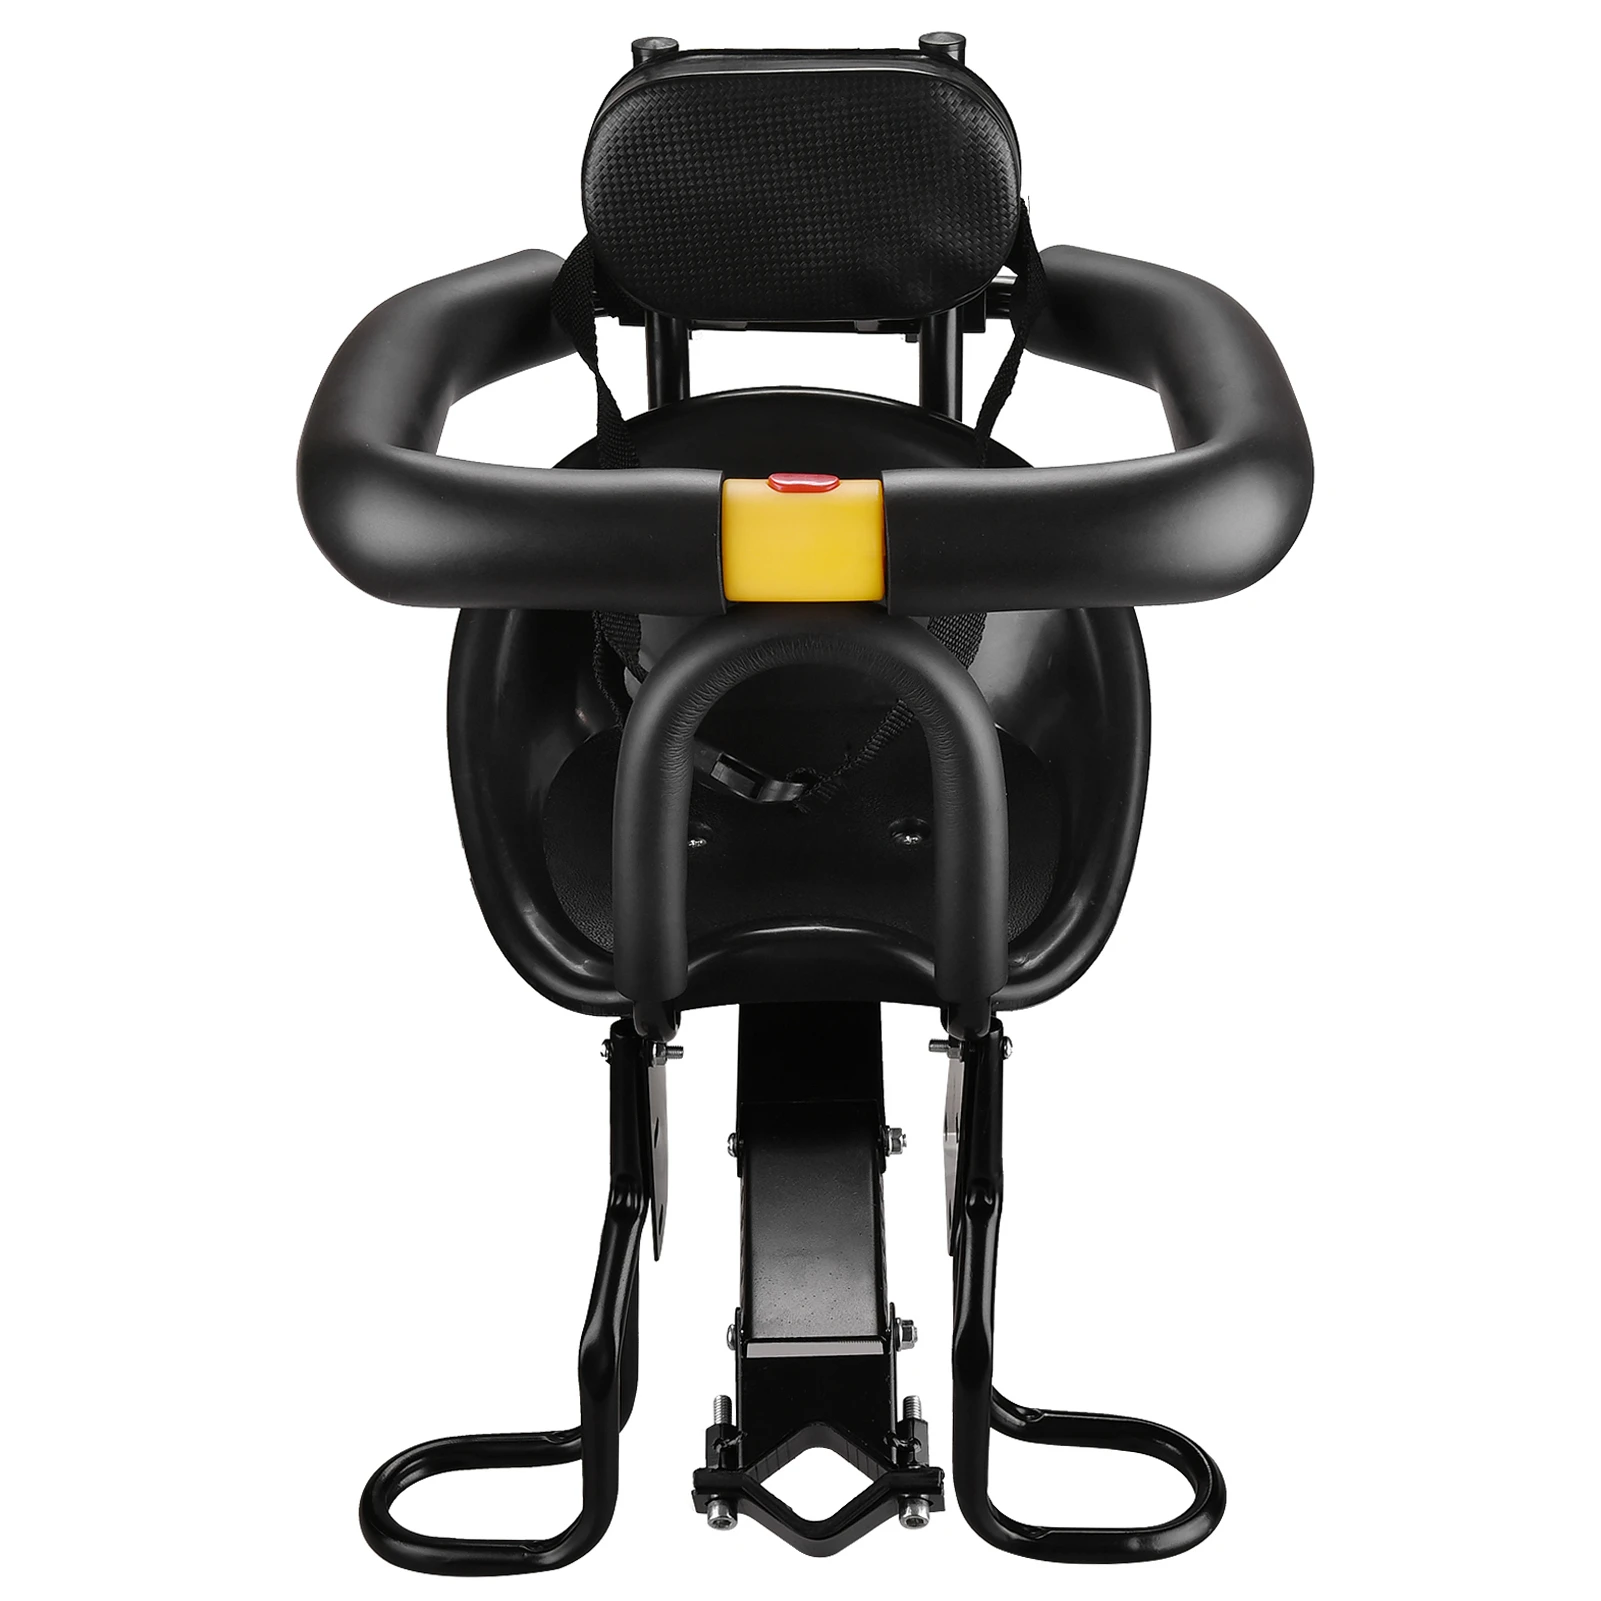 Safety Child Bicycle Seat Bike Front Baby Seat Kids Saddle with Foot Pedals Support Back Rest For MTB Road Bike Bicycle